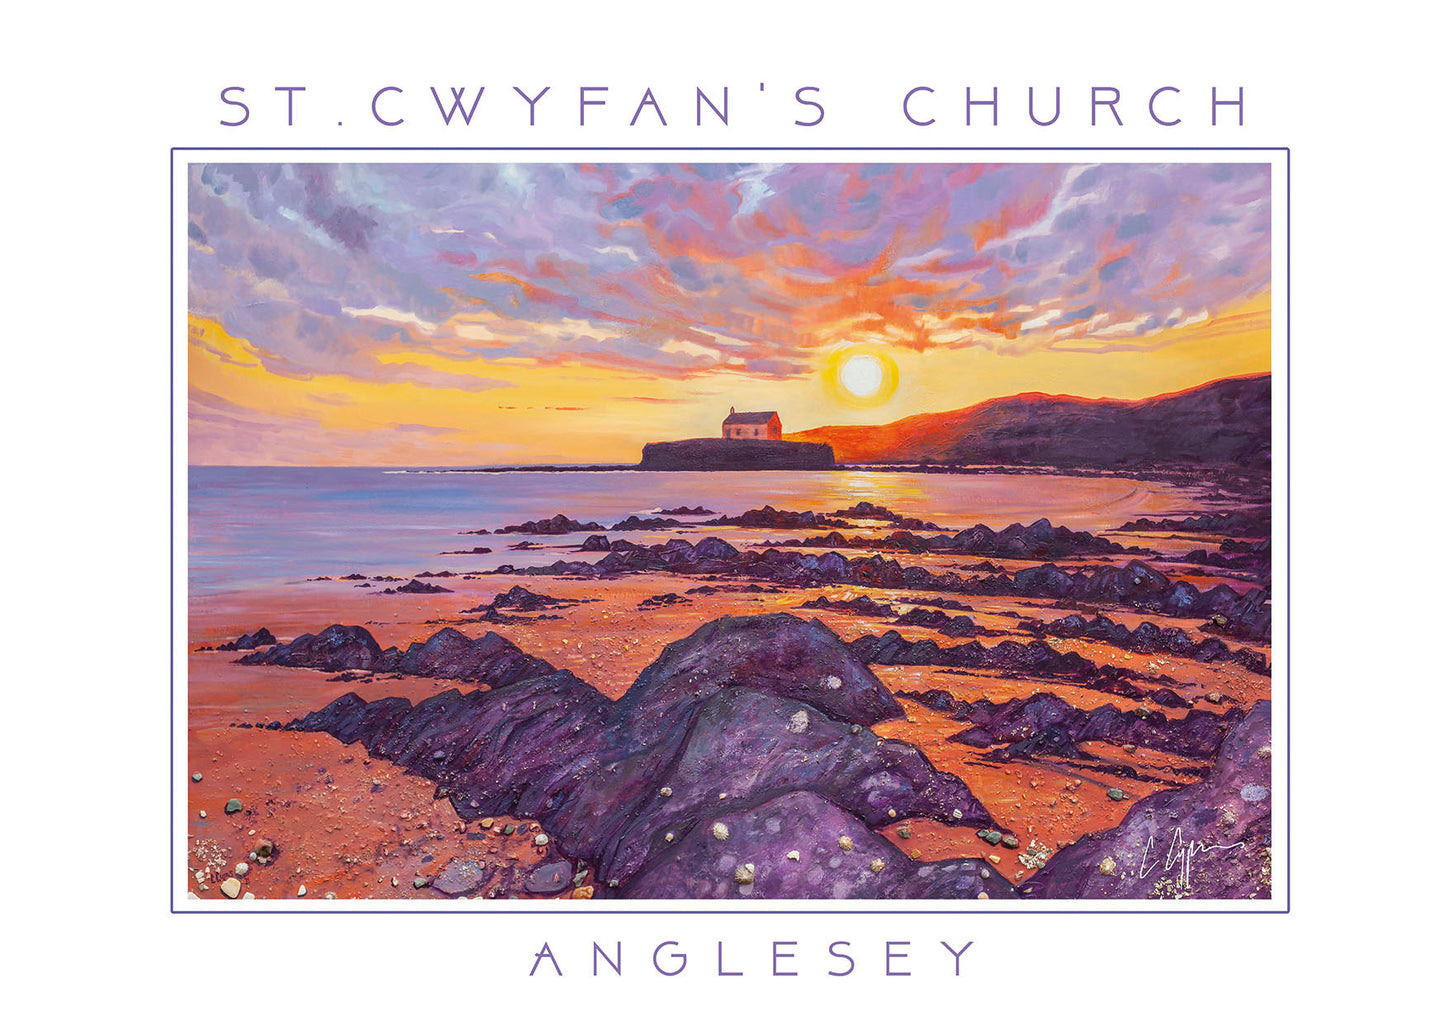 Special Edition Poster Print ~ St. Cwyfans Church ~ Church in the Sea, Anglesey